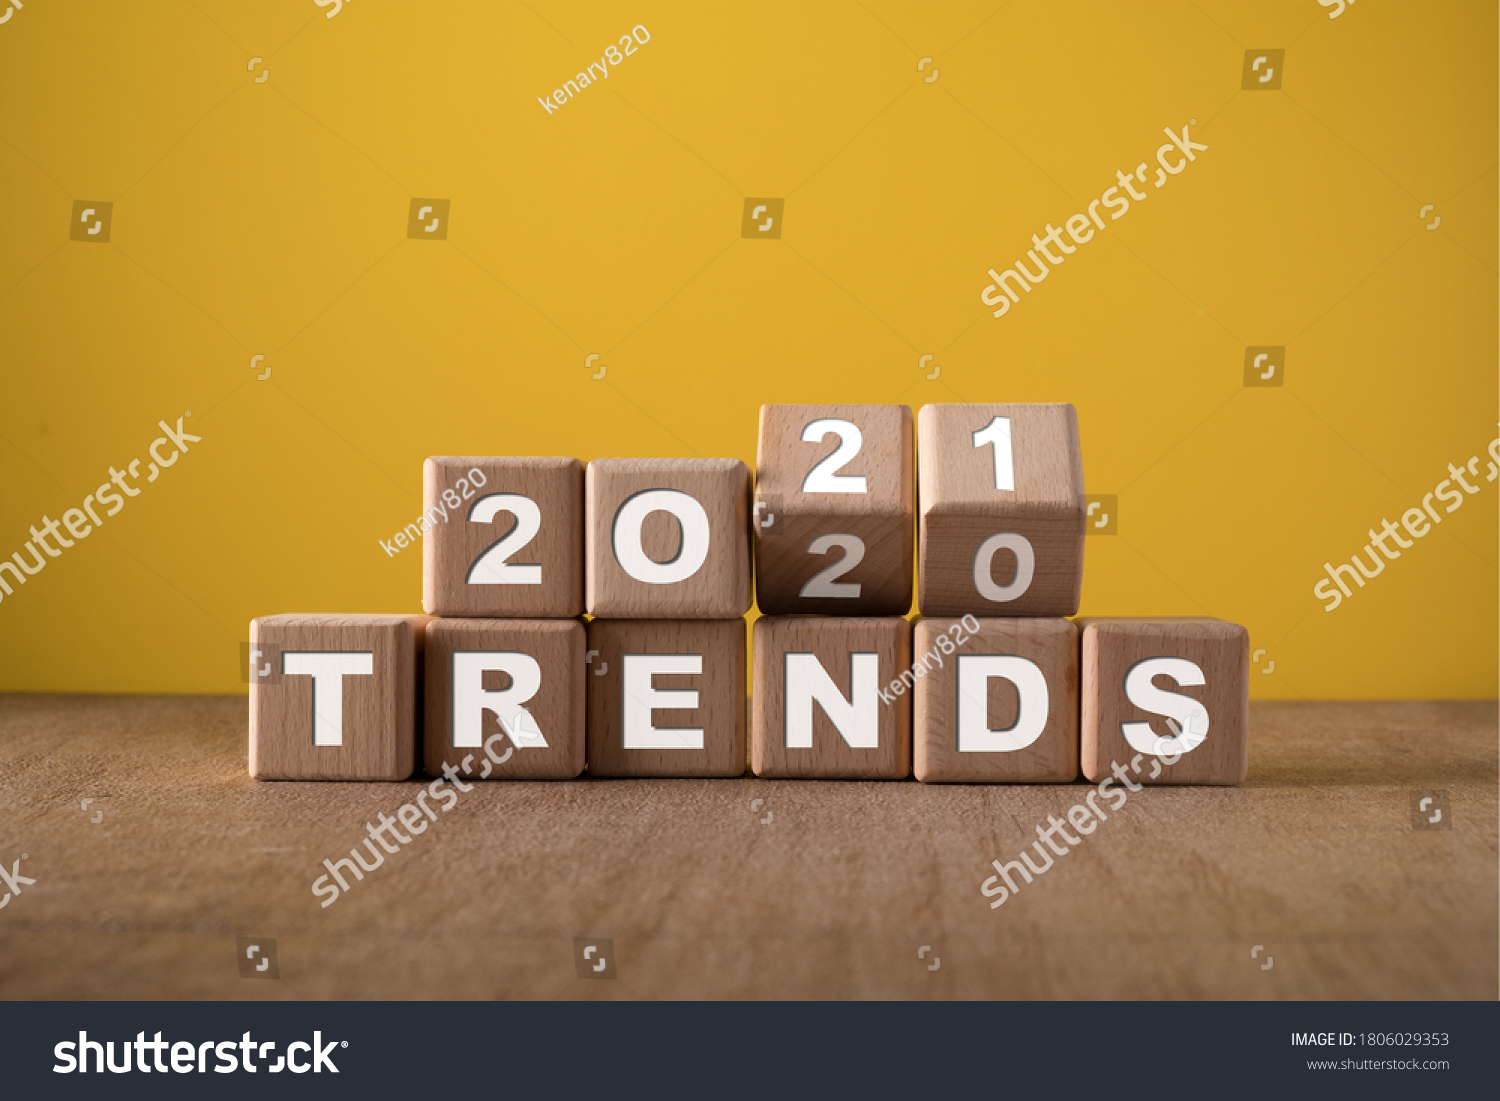 2021 trends, wooden block with text. #1806029353